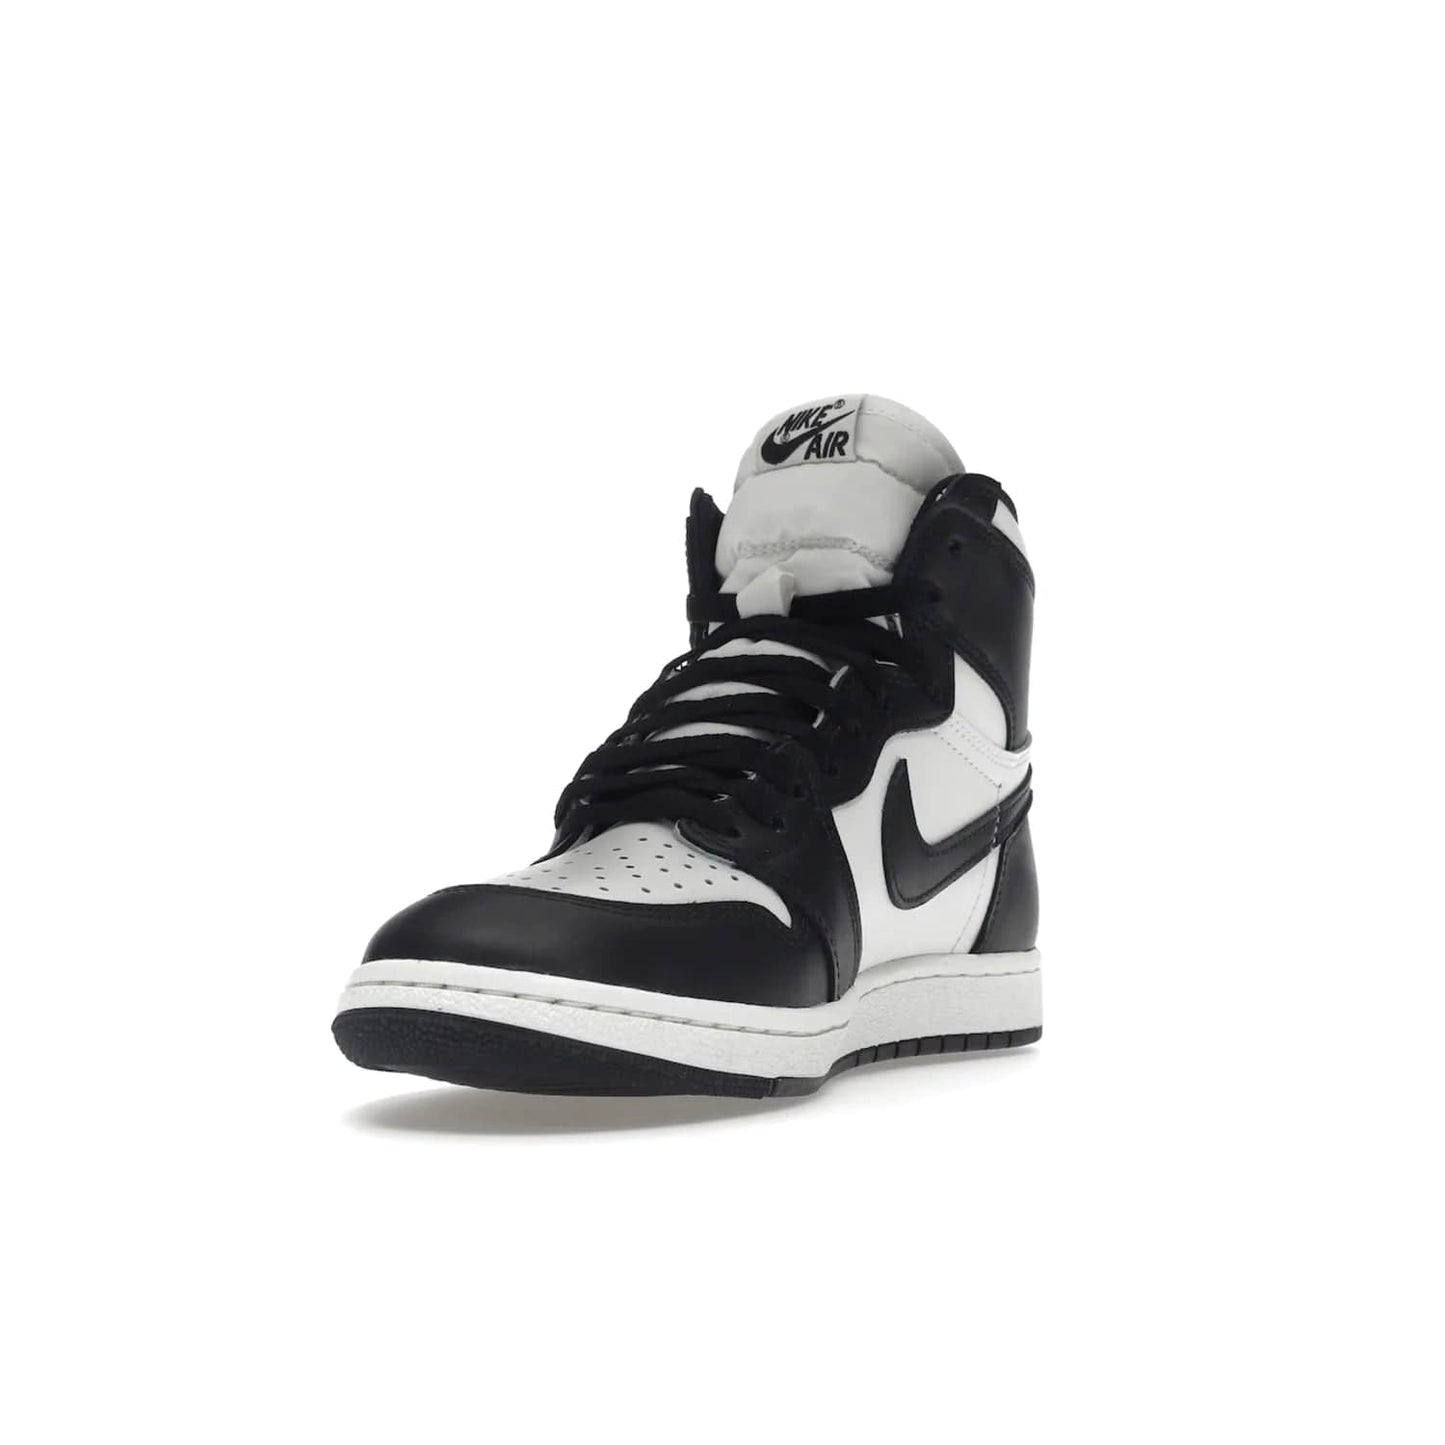 Jordan 1 Retro High 85 Black White (2023) - Image 13 - Only at www.BallersClubKickz.com - Brand new Jordan 1 Retro High 85 Black White (2023) now available. A classic color scheme of black and white leather uppers with signature Nike Air logo on the tongue. Must-have for any Air Jordan fan. Available February 15, 2023.